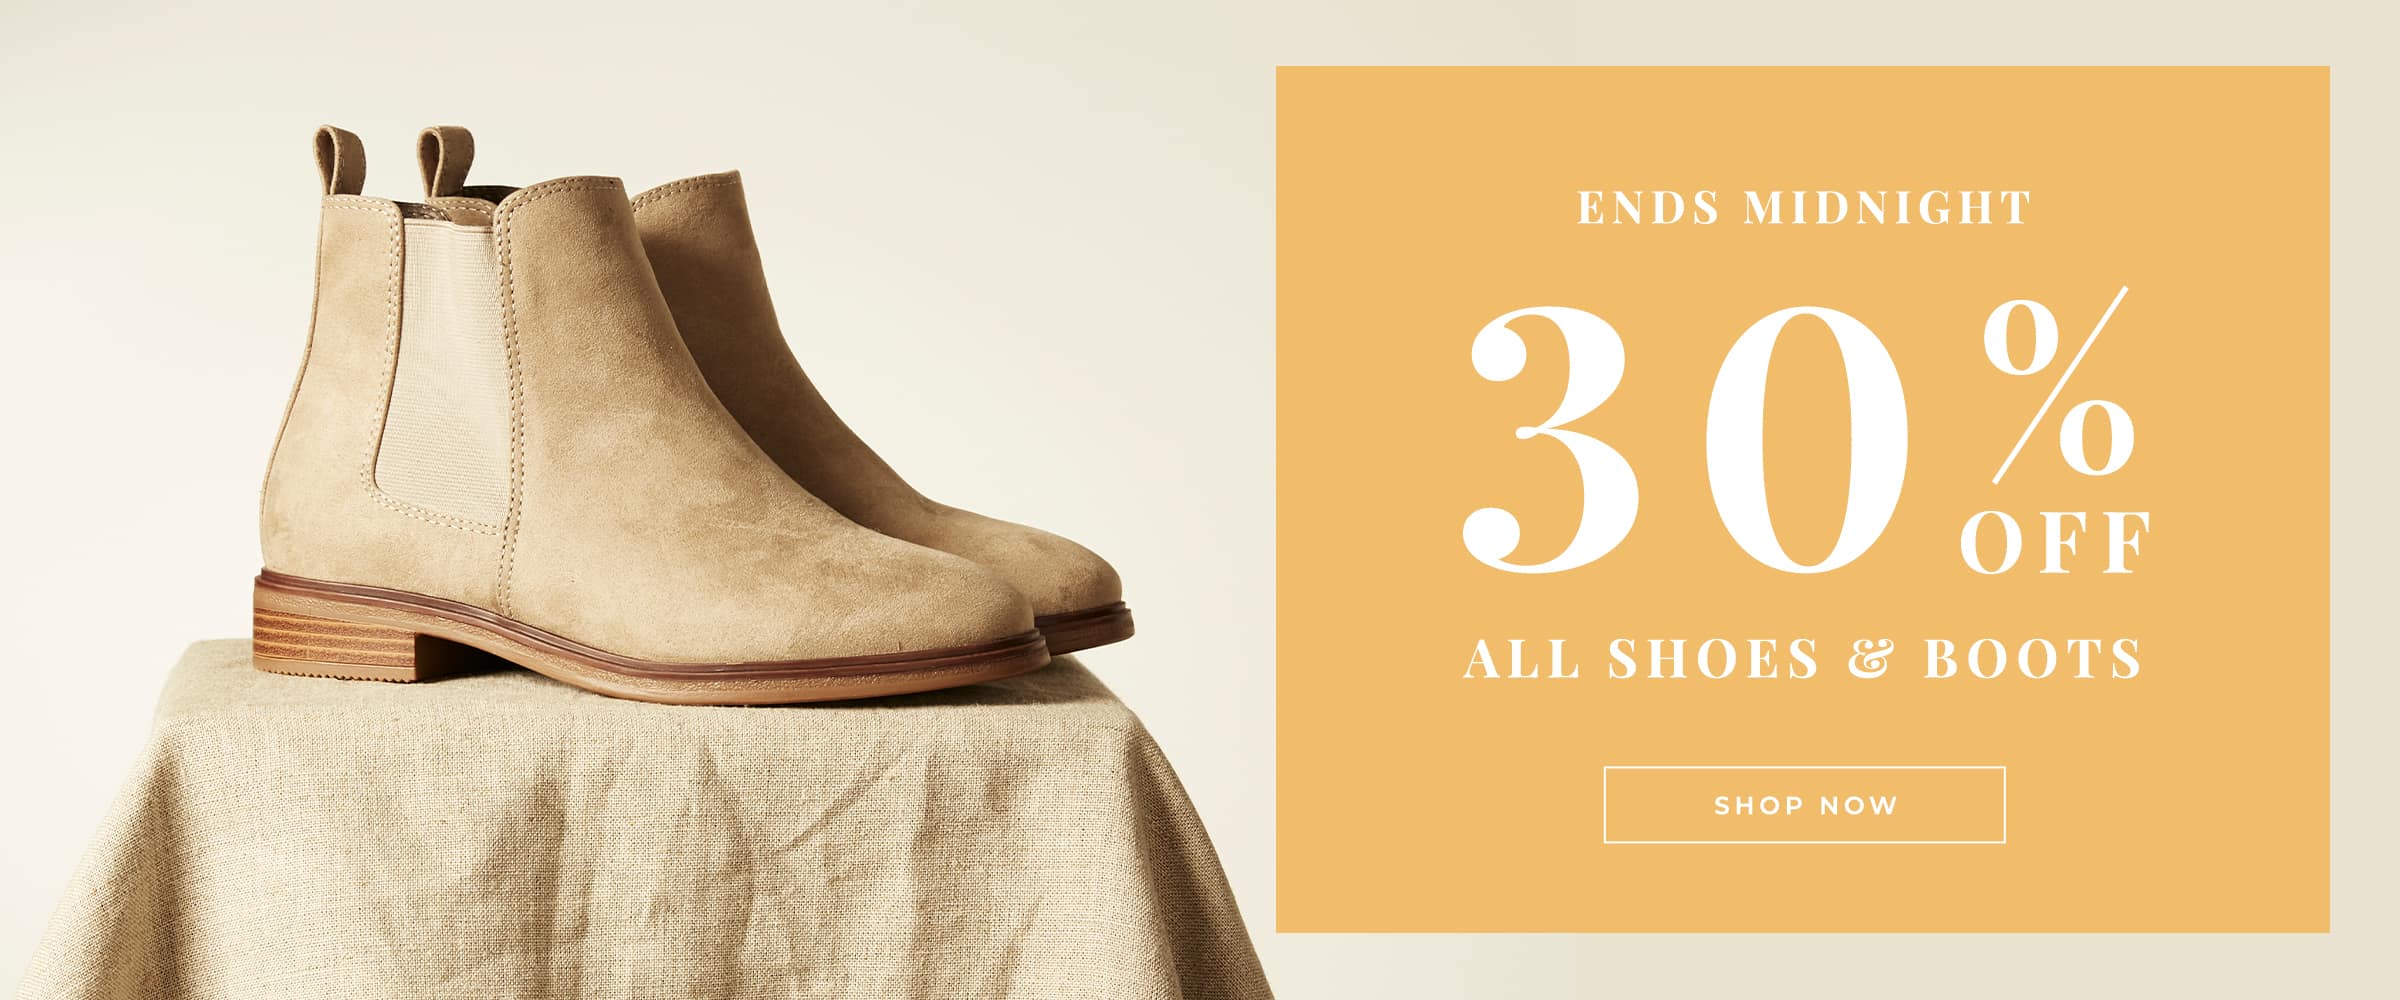 Evans Clothing: 30% off all women's shoes & boots